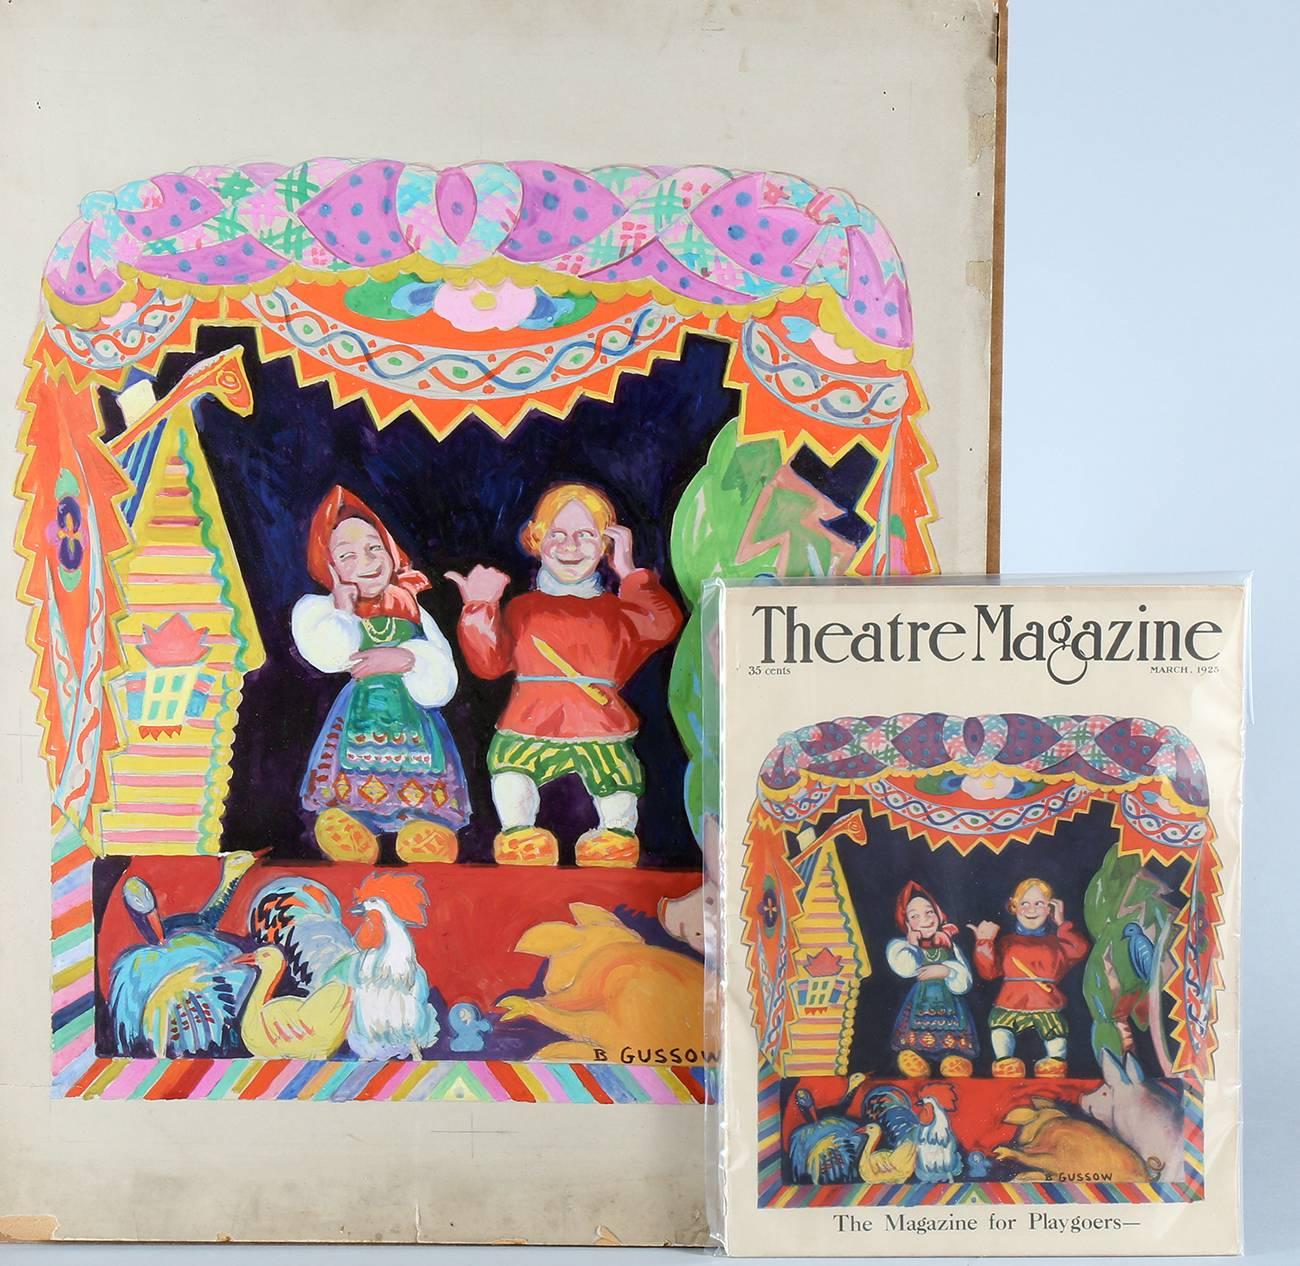 This narrative and colorful painting by the Russian-American illustrator Bernard Gussow appeared as the cover for the March, 1925 issue of Theatre Magazine - The Magazine For Playgoers. The image shows two rosy cheeked children in Eastern European